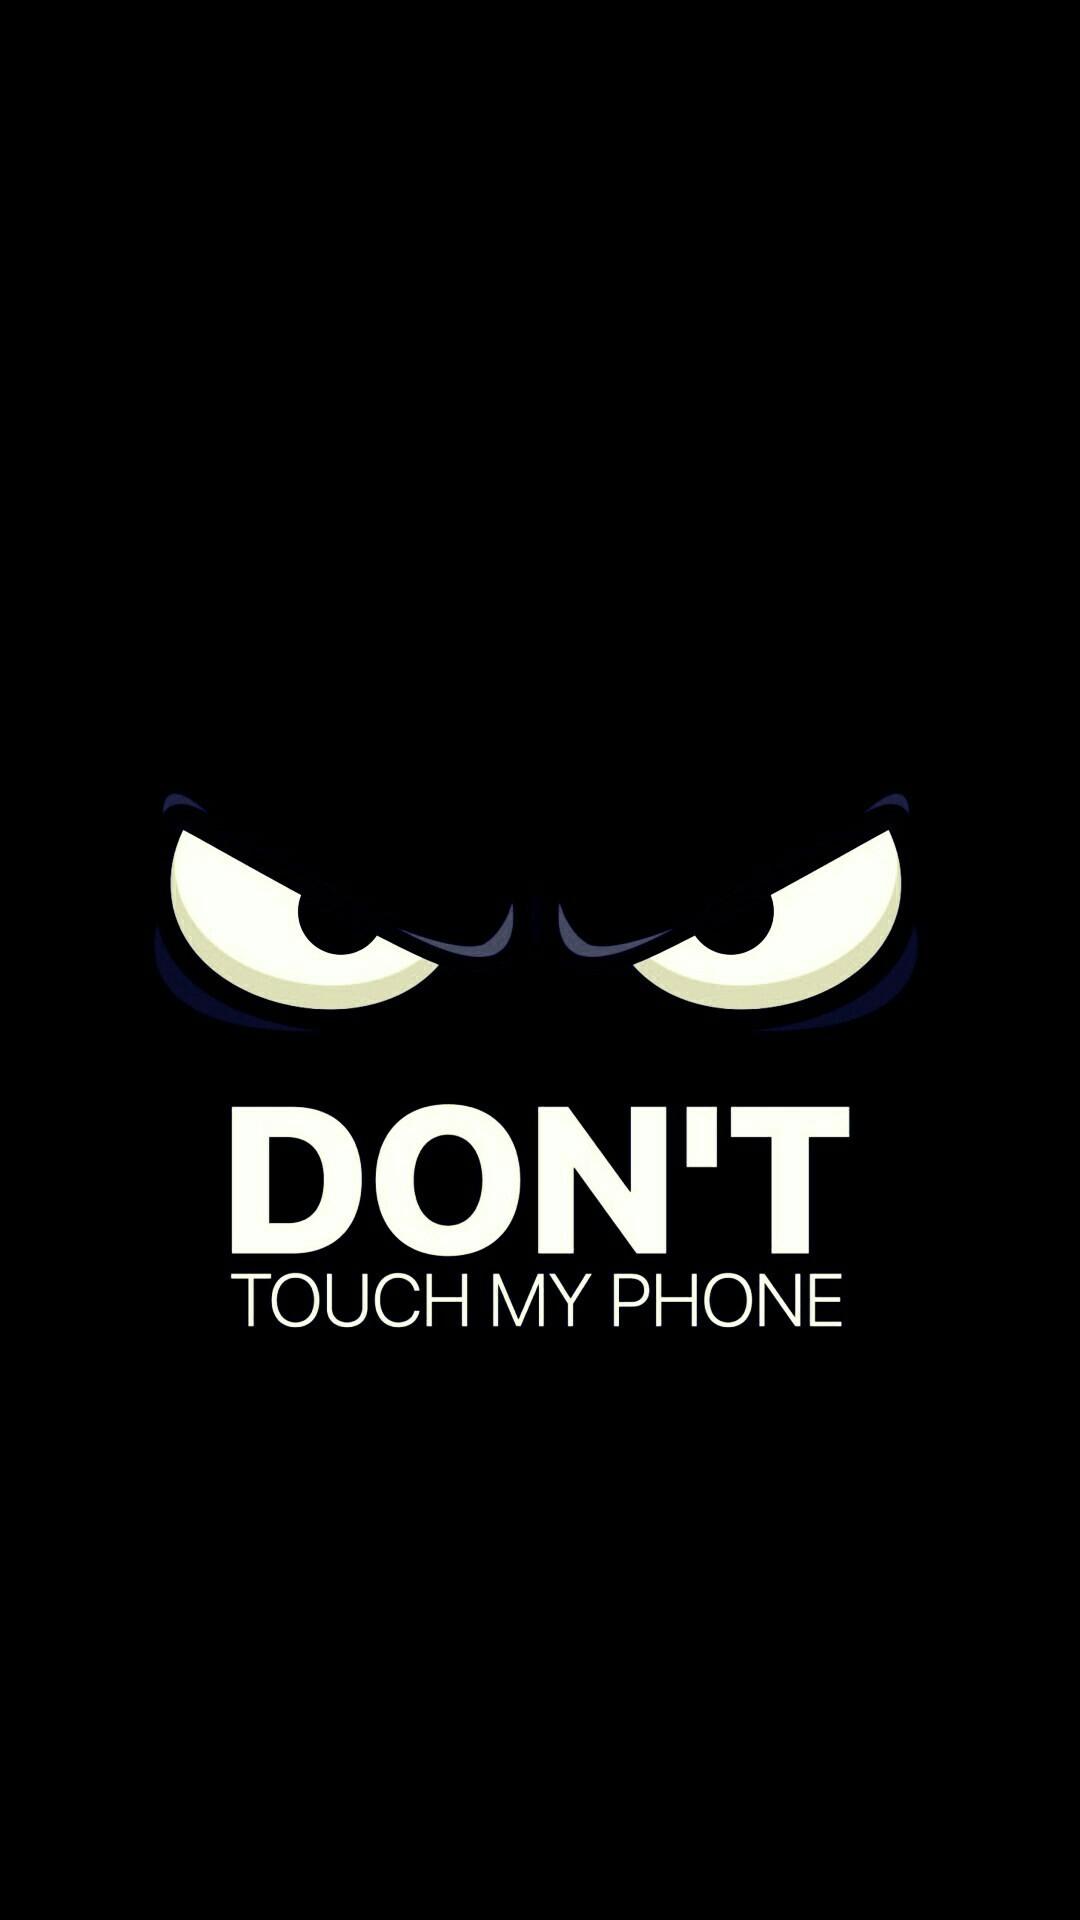 Don't Touch My Phone Design